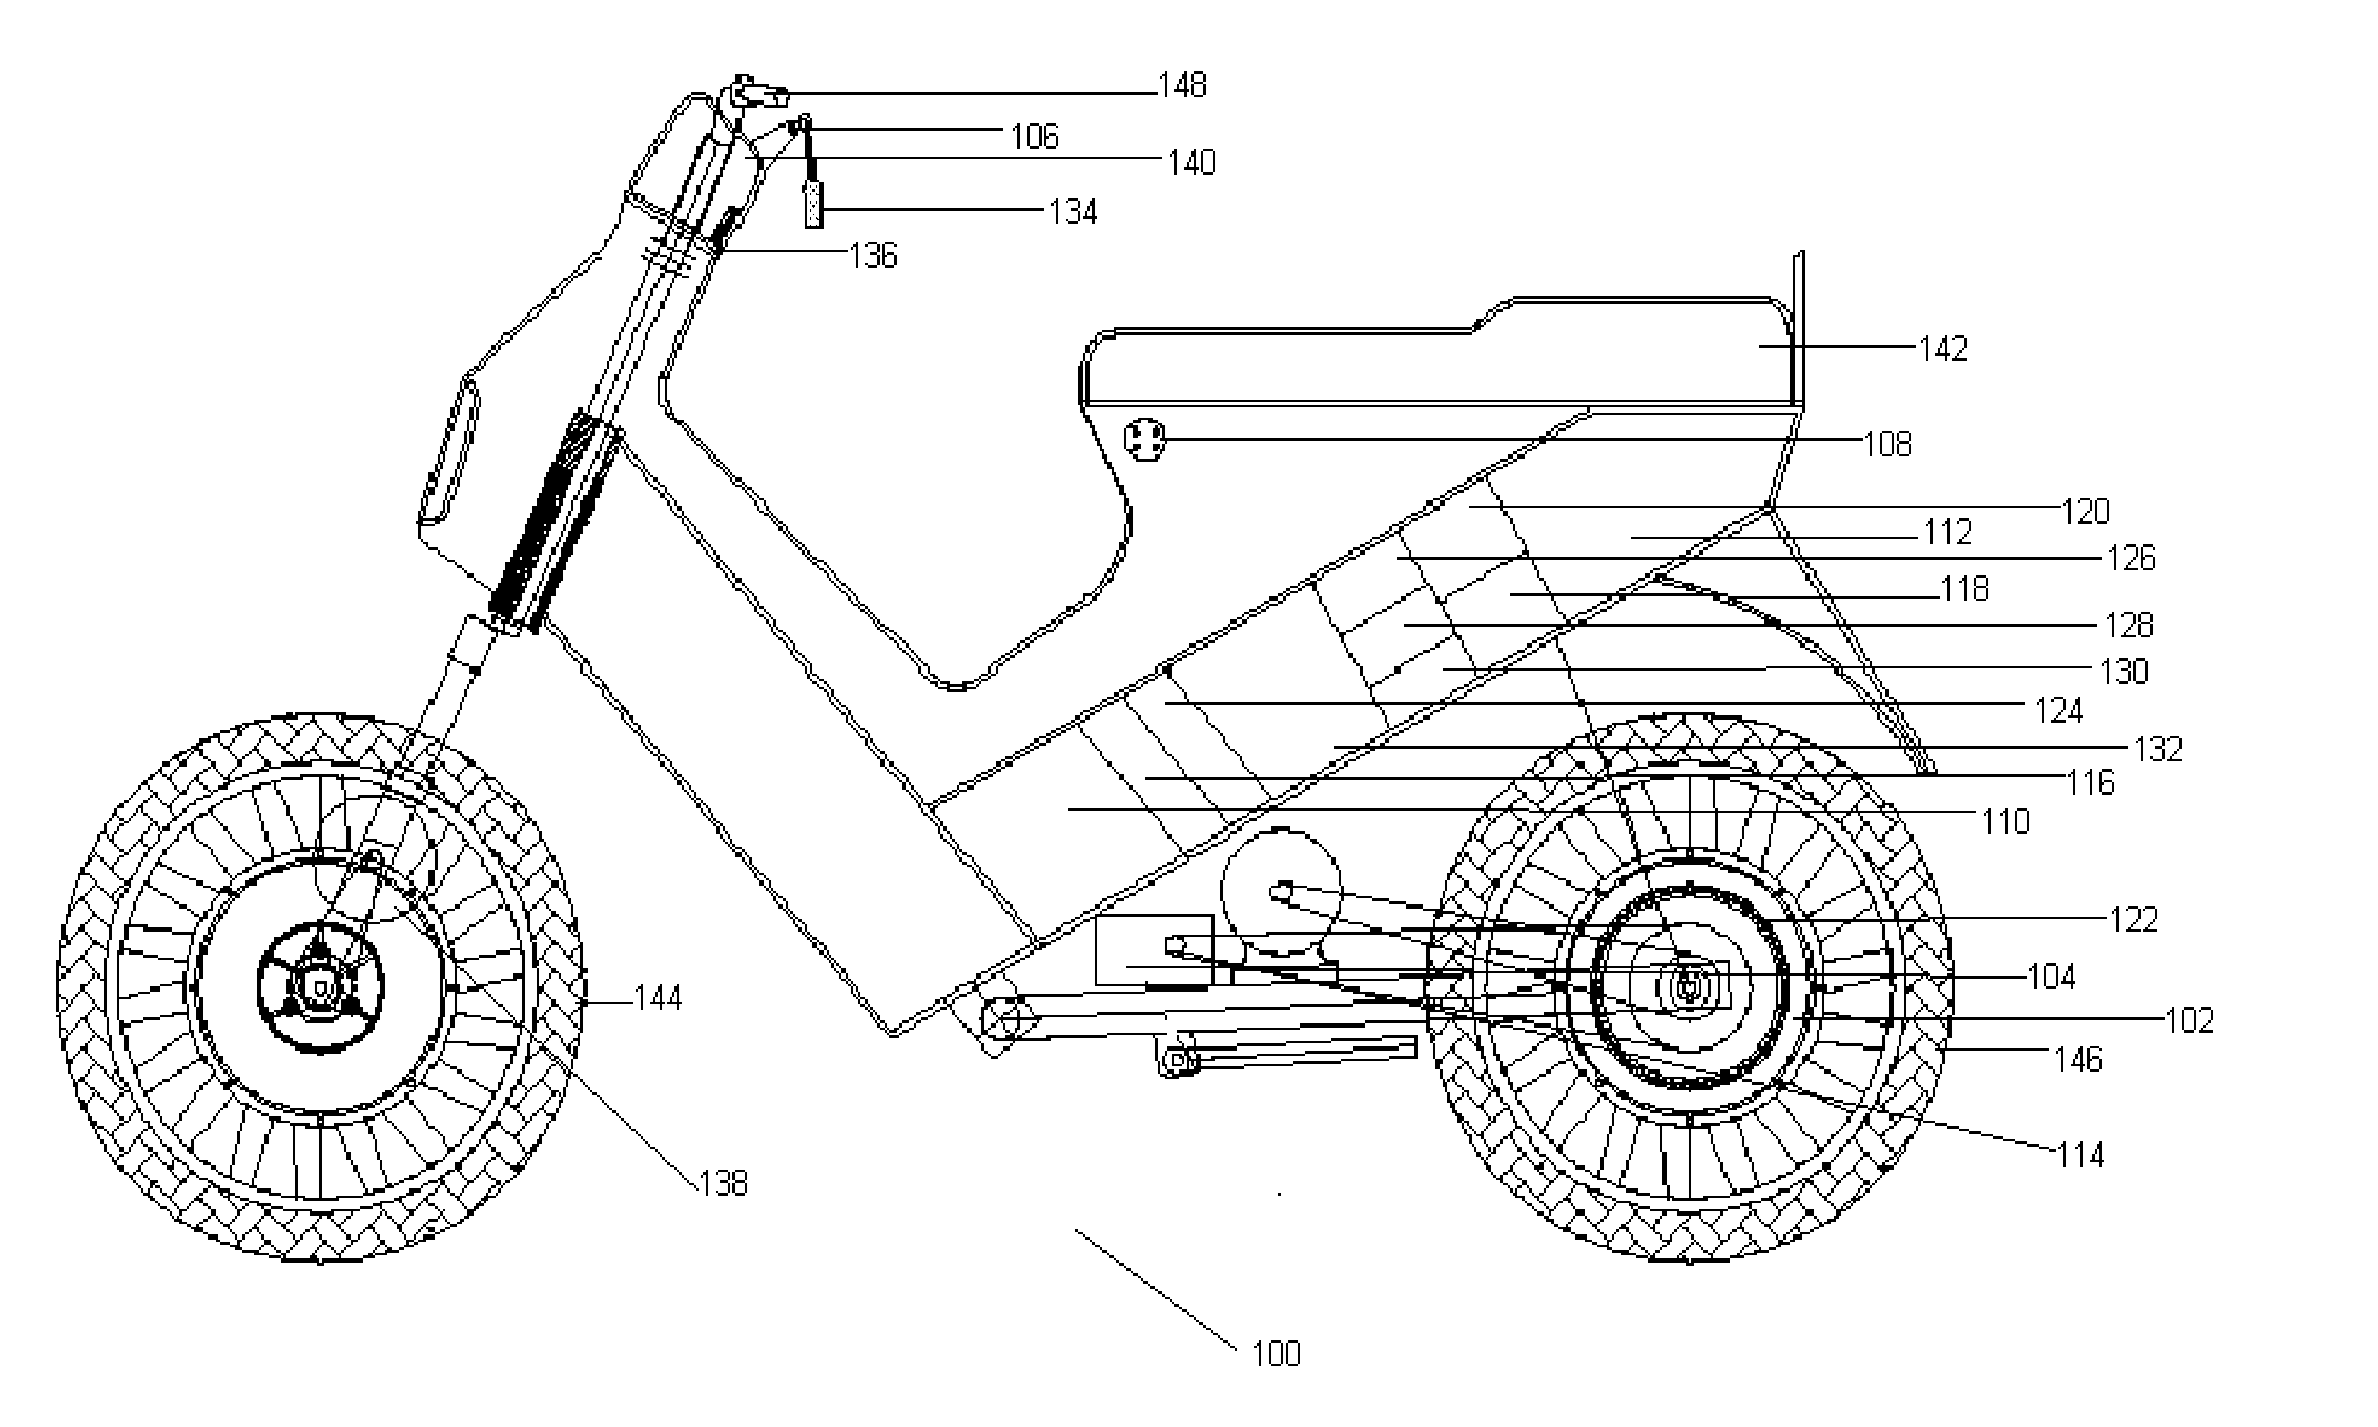 Electrically powered motorized vehicle with continuously variable transmission and combined hybrid system